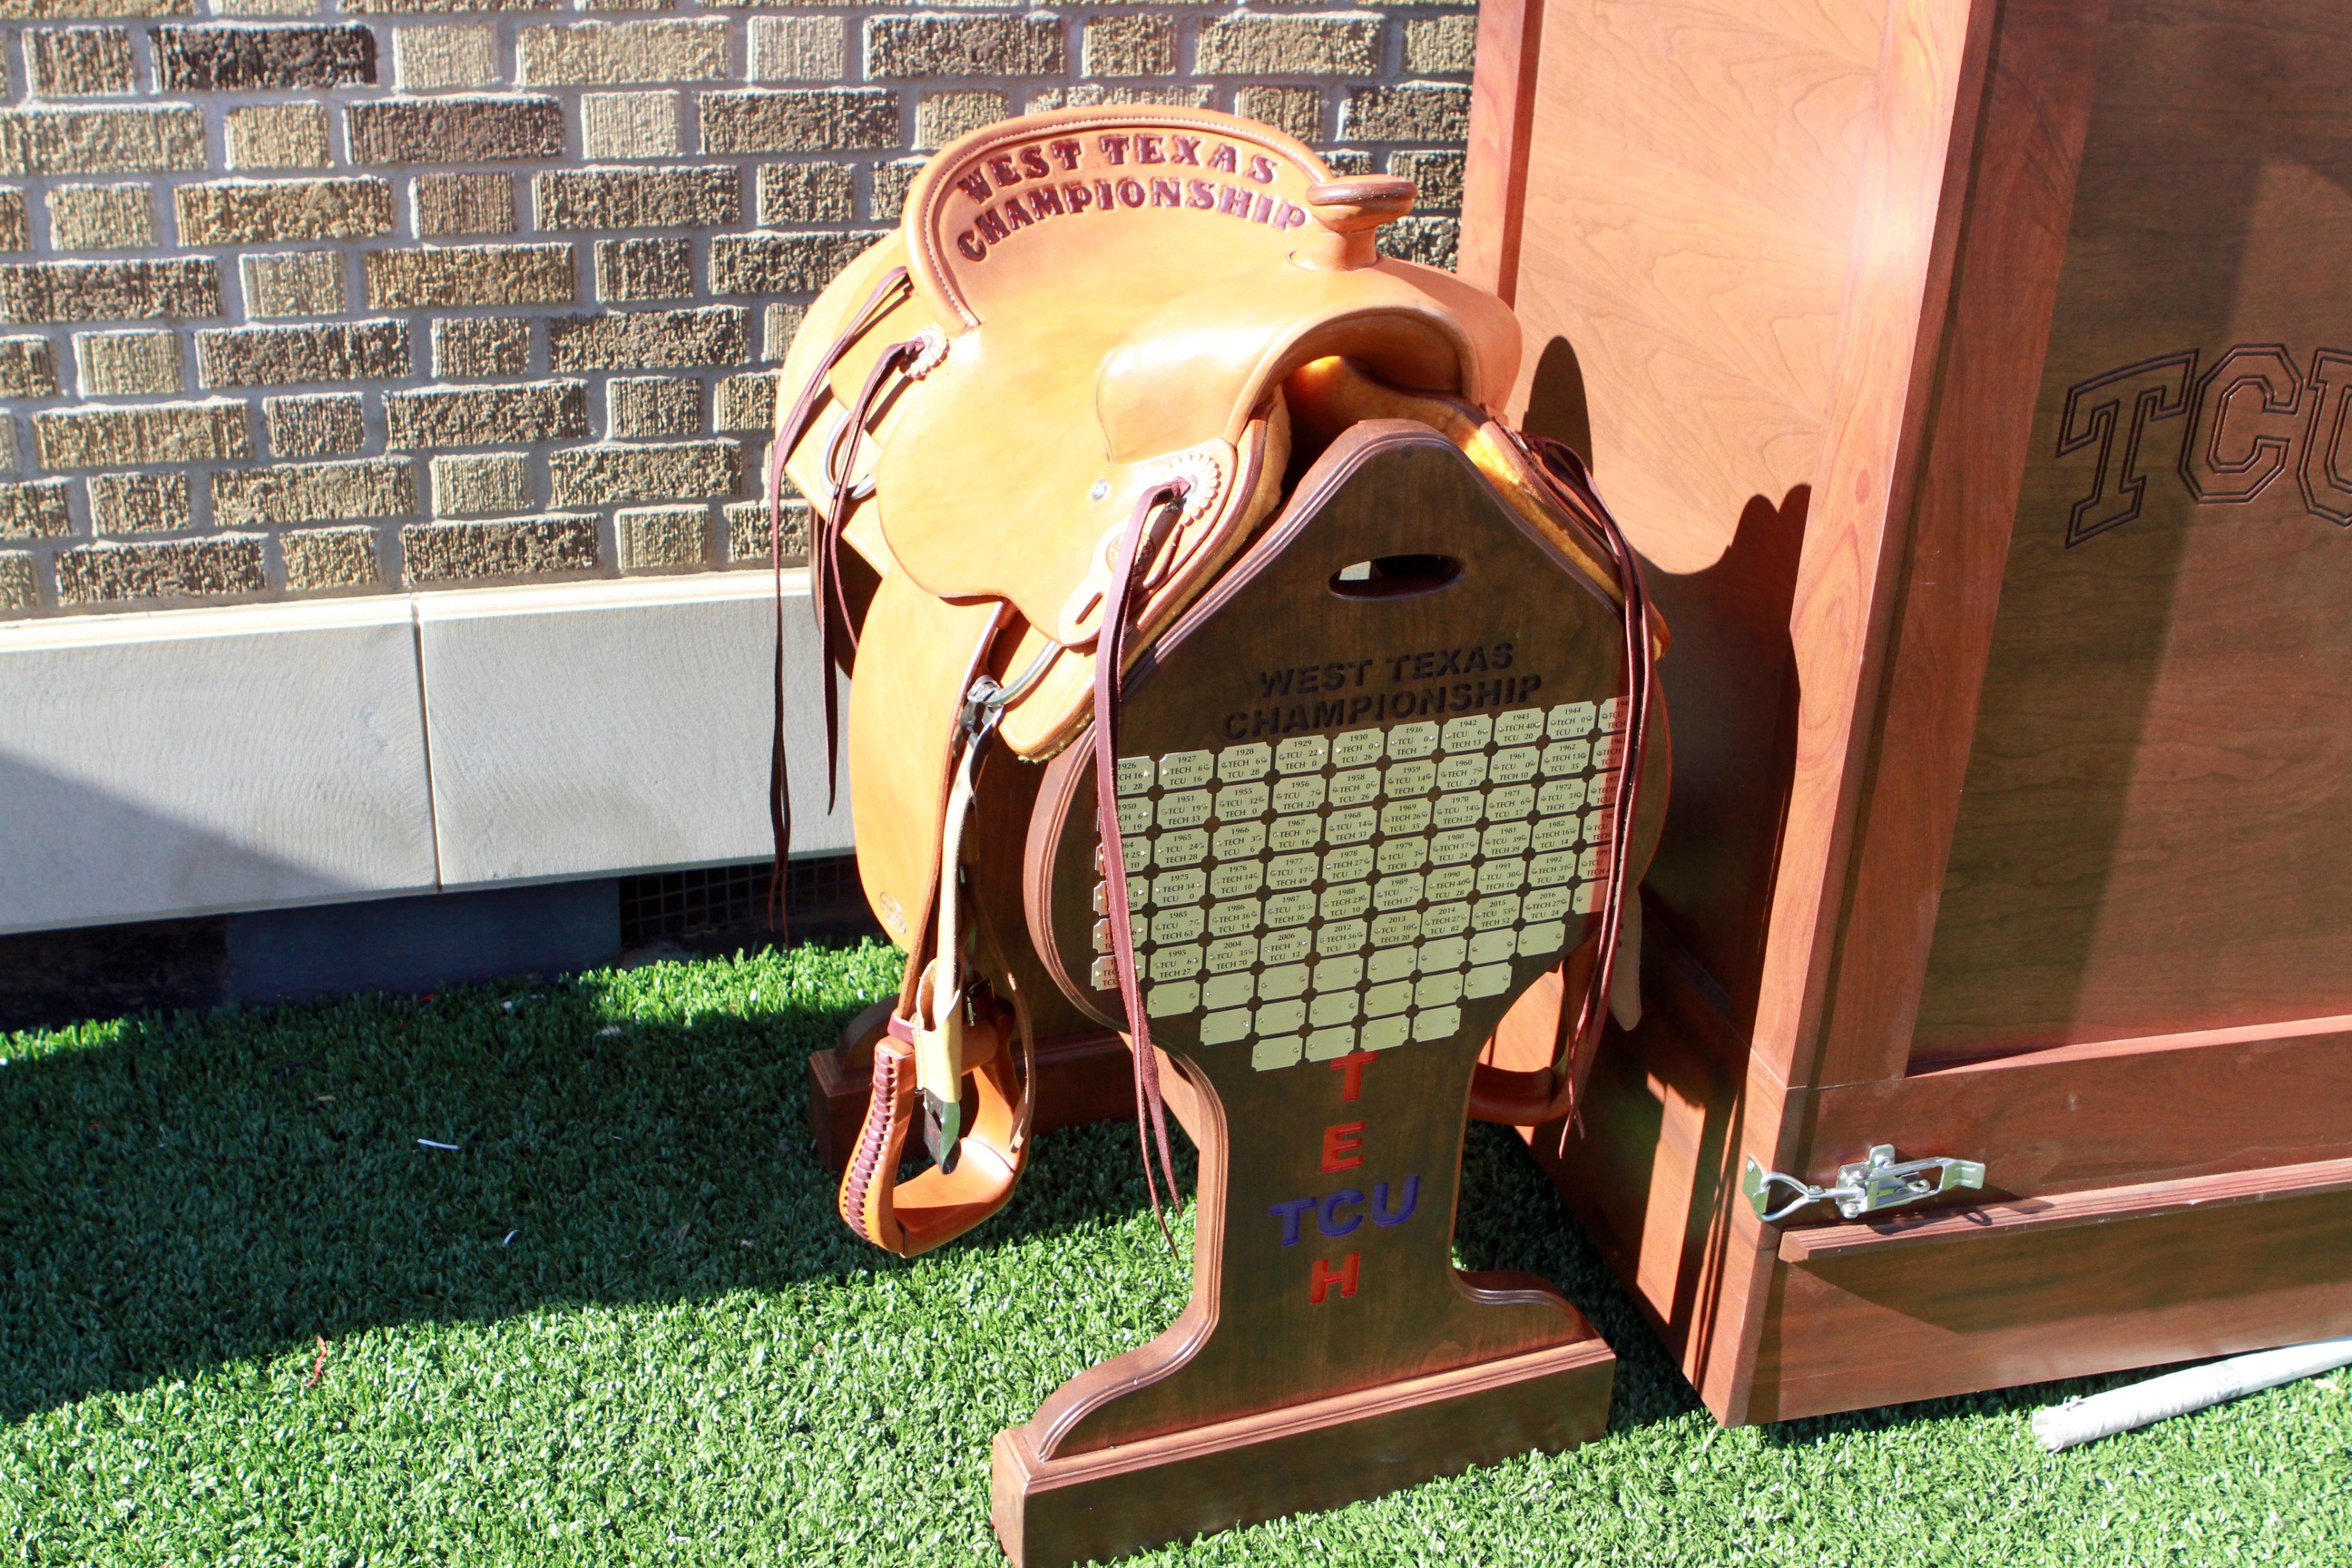 A detailed view of the West Texas Championship saddle that goes to the winner of the TCU Horned Frogs and the Texas Tech Red Raiders game at Jones AT&T Stadium.